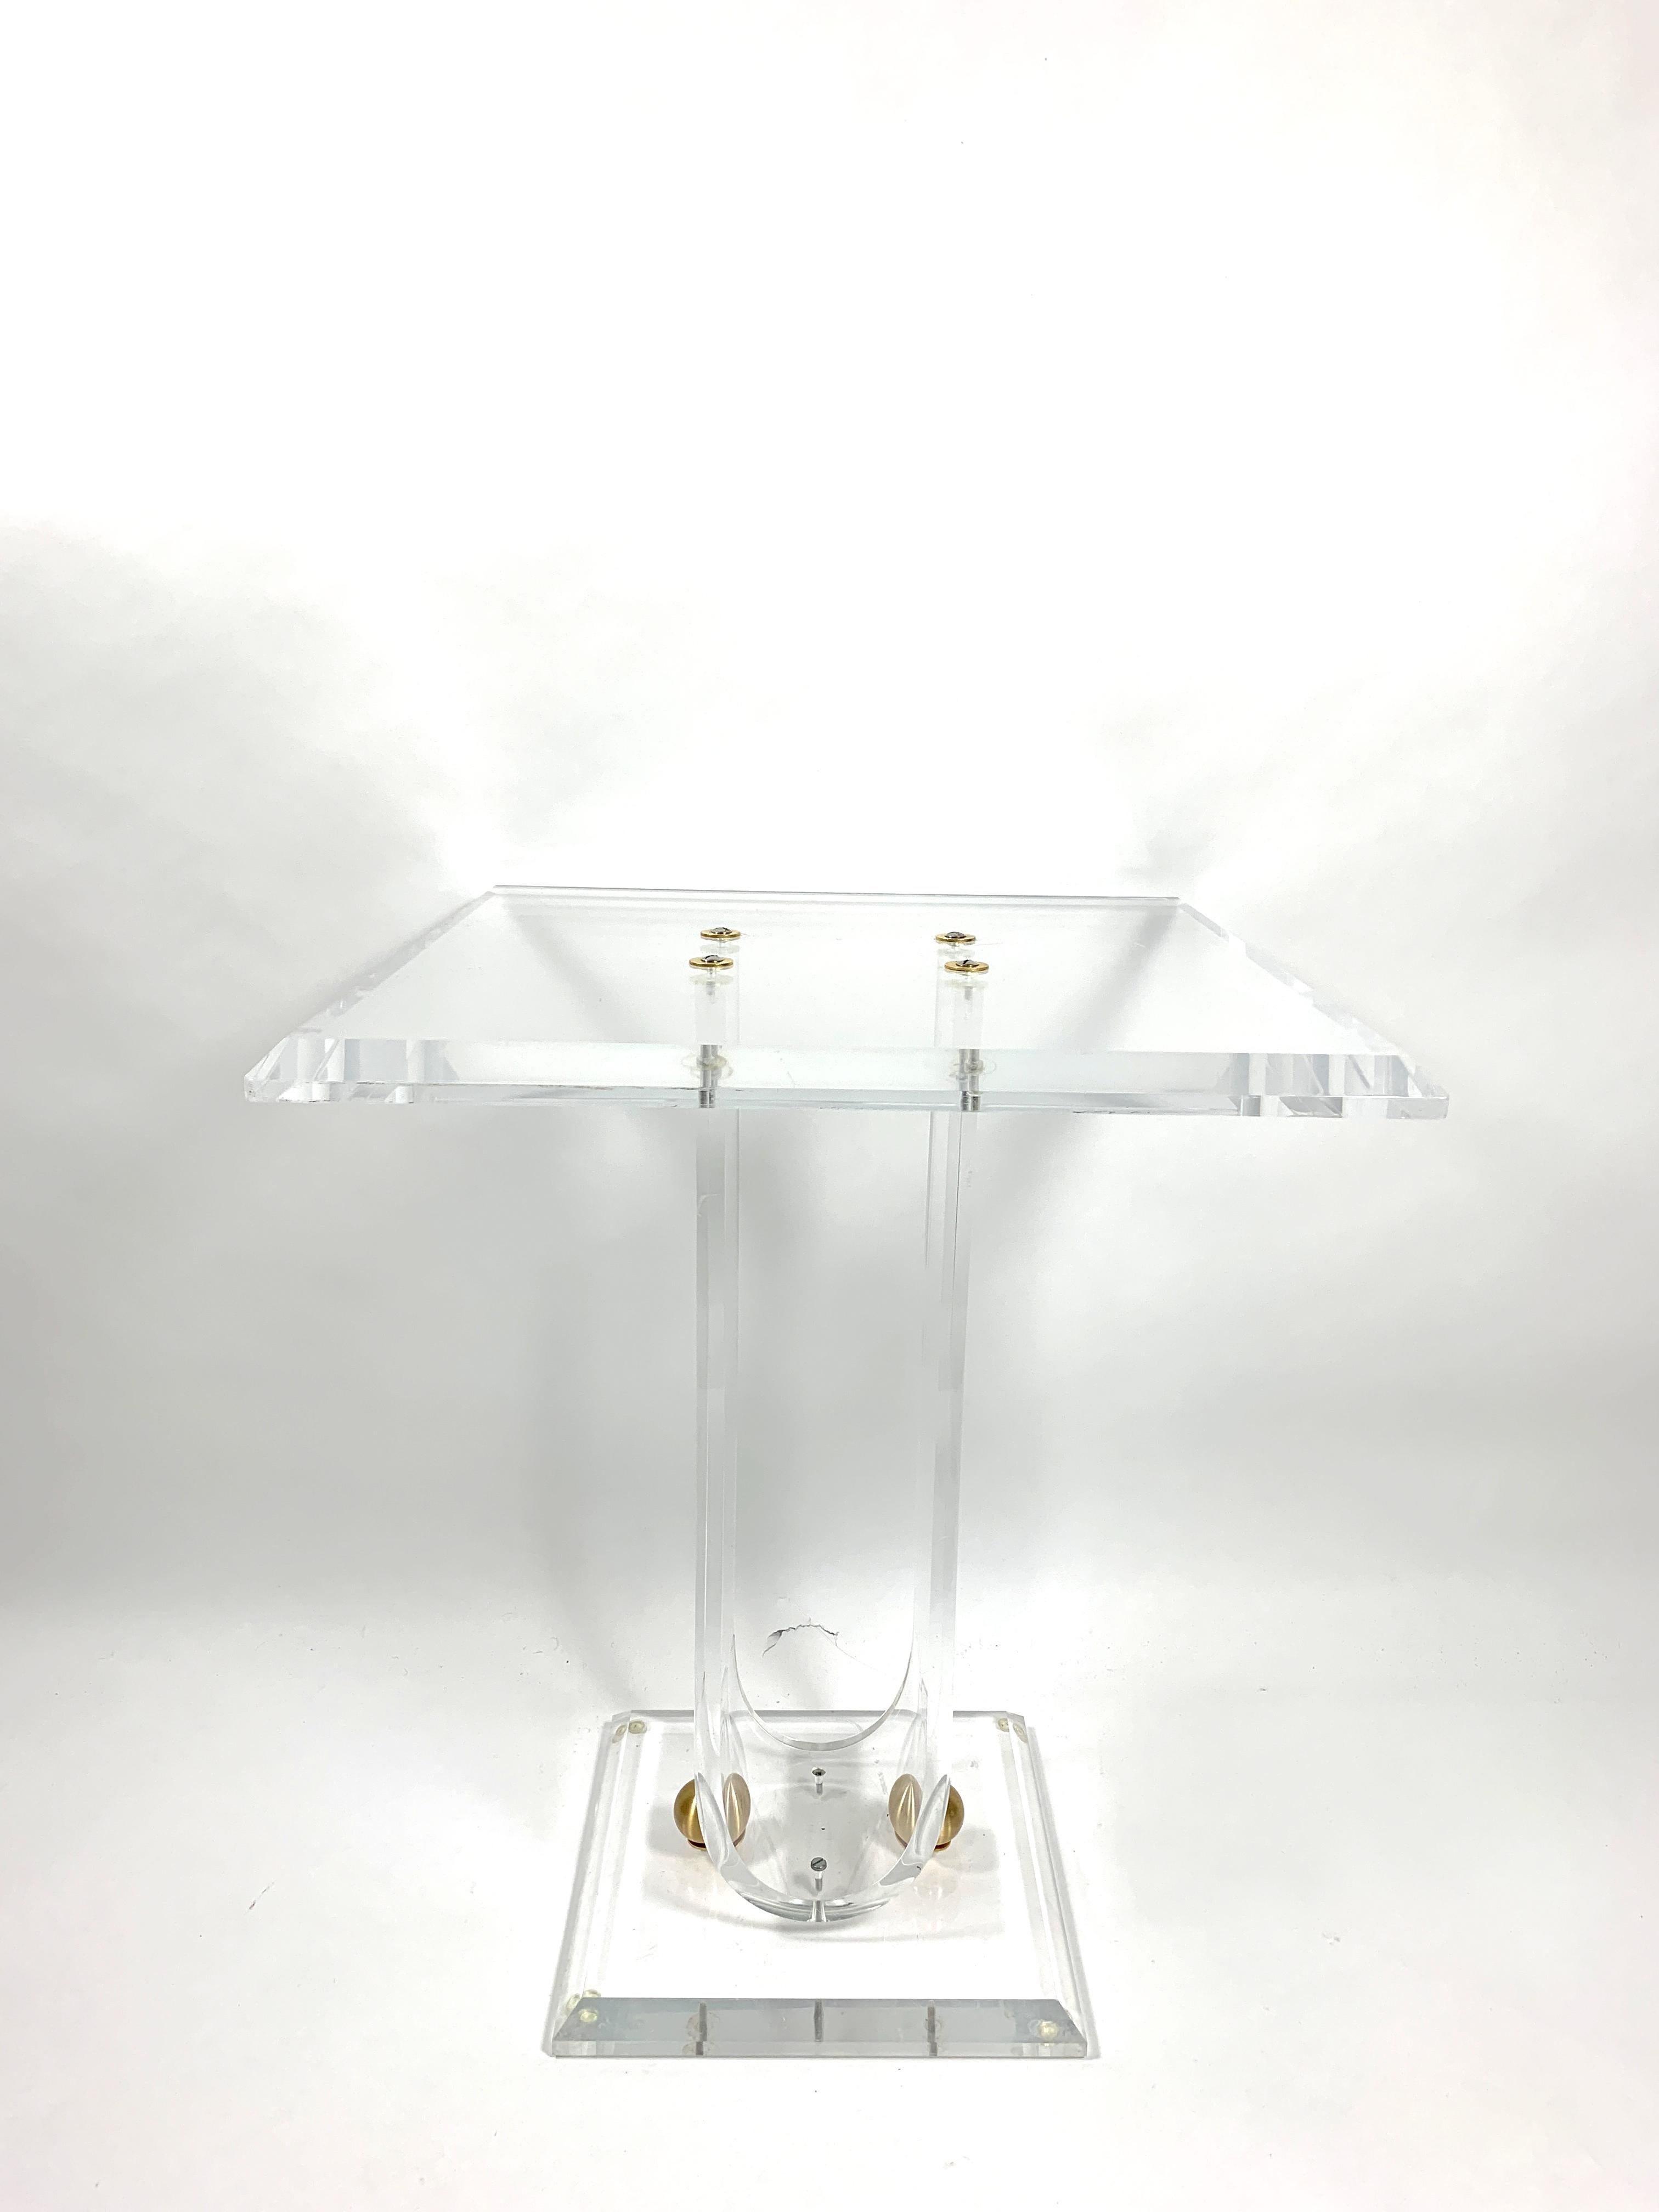 This acrylic coffee table features nice brass plated legs, it's in good condition, probably from the 1970s period.